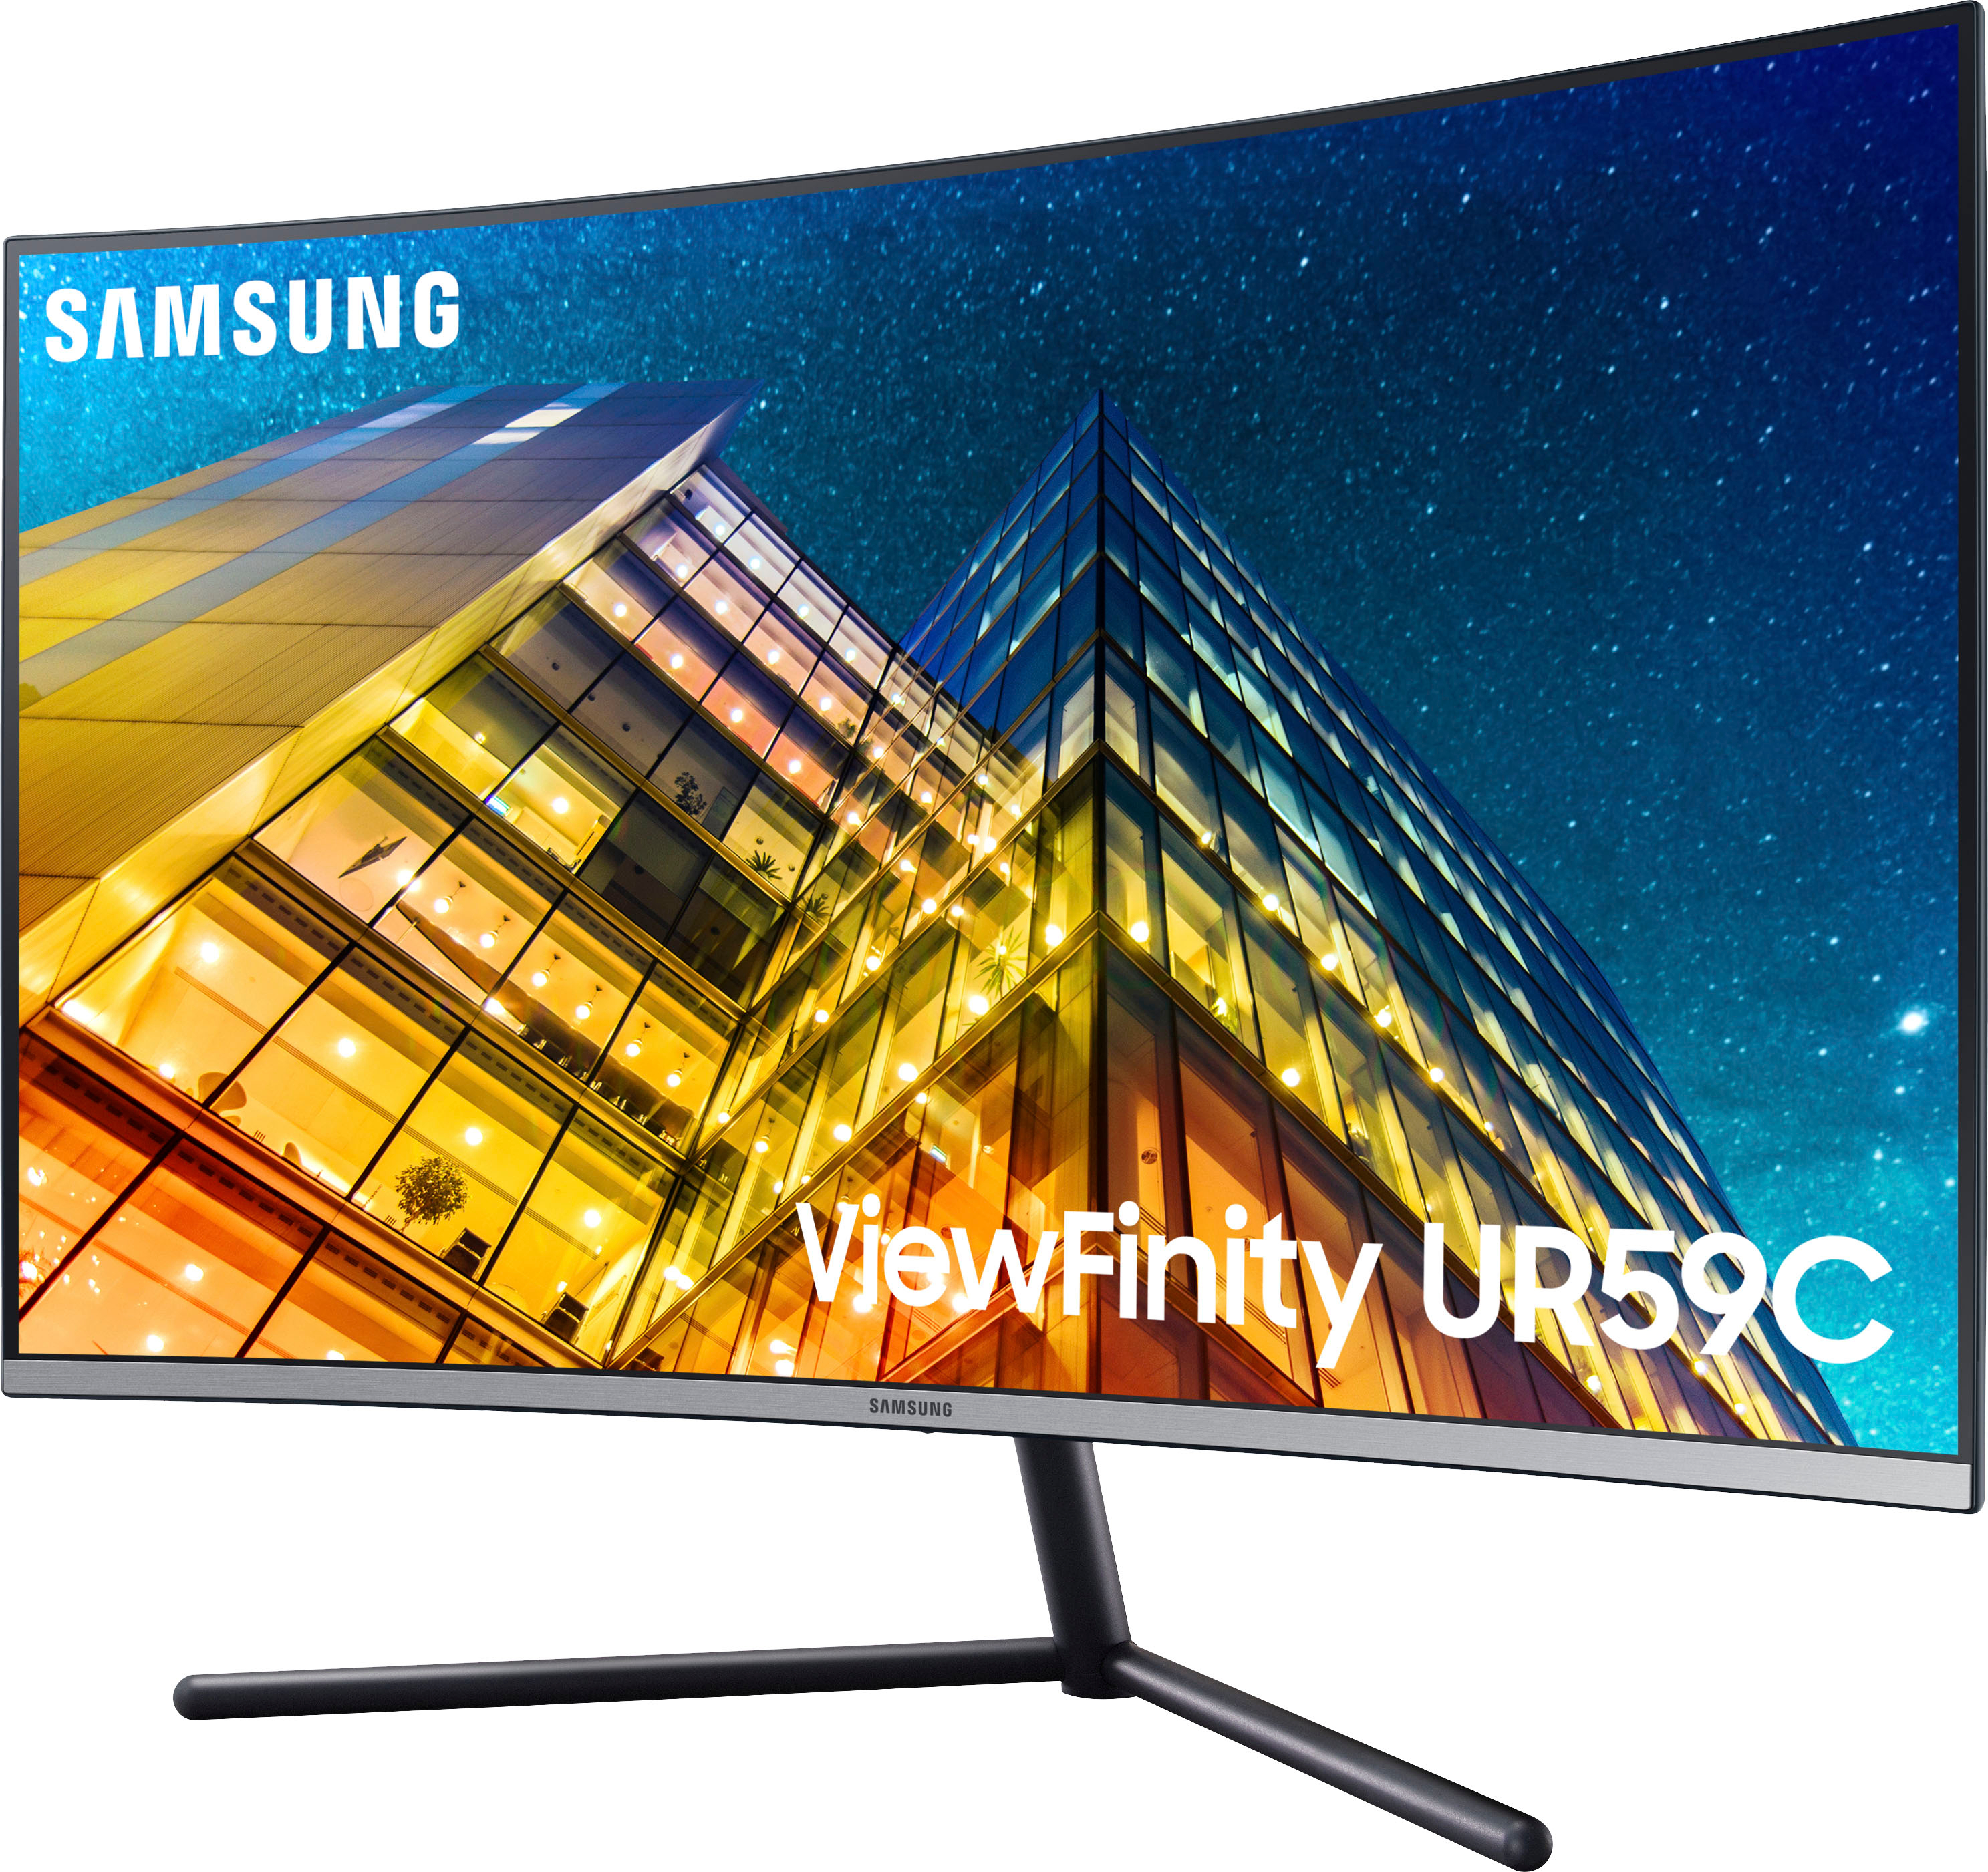 Angle View: Samsung - S60A Series 24" QHD Monitor with HDR (HDMI, USB) - Black